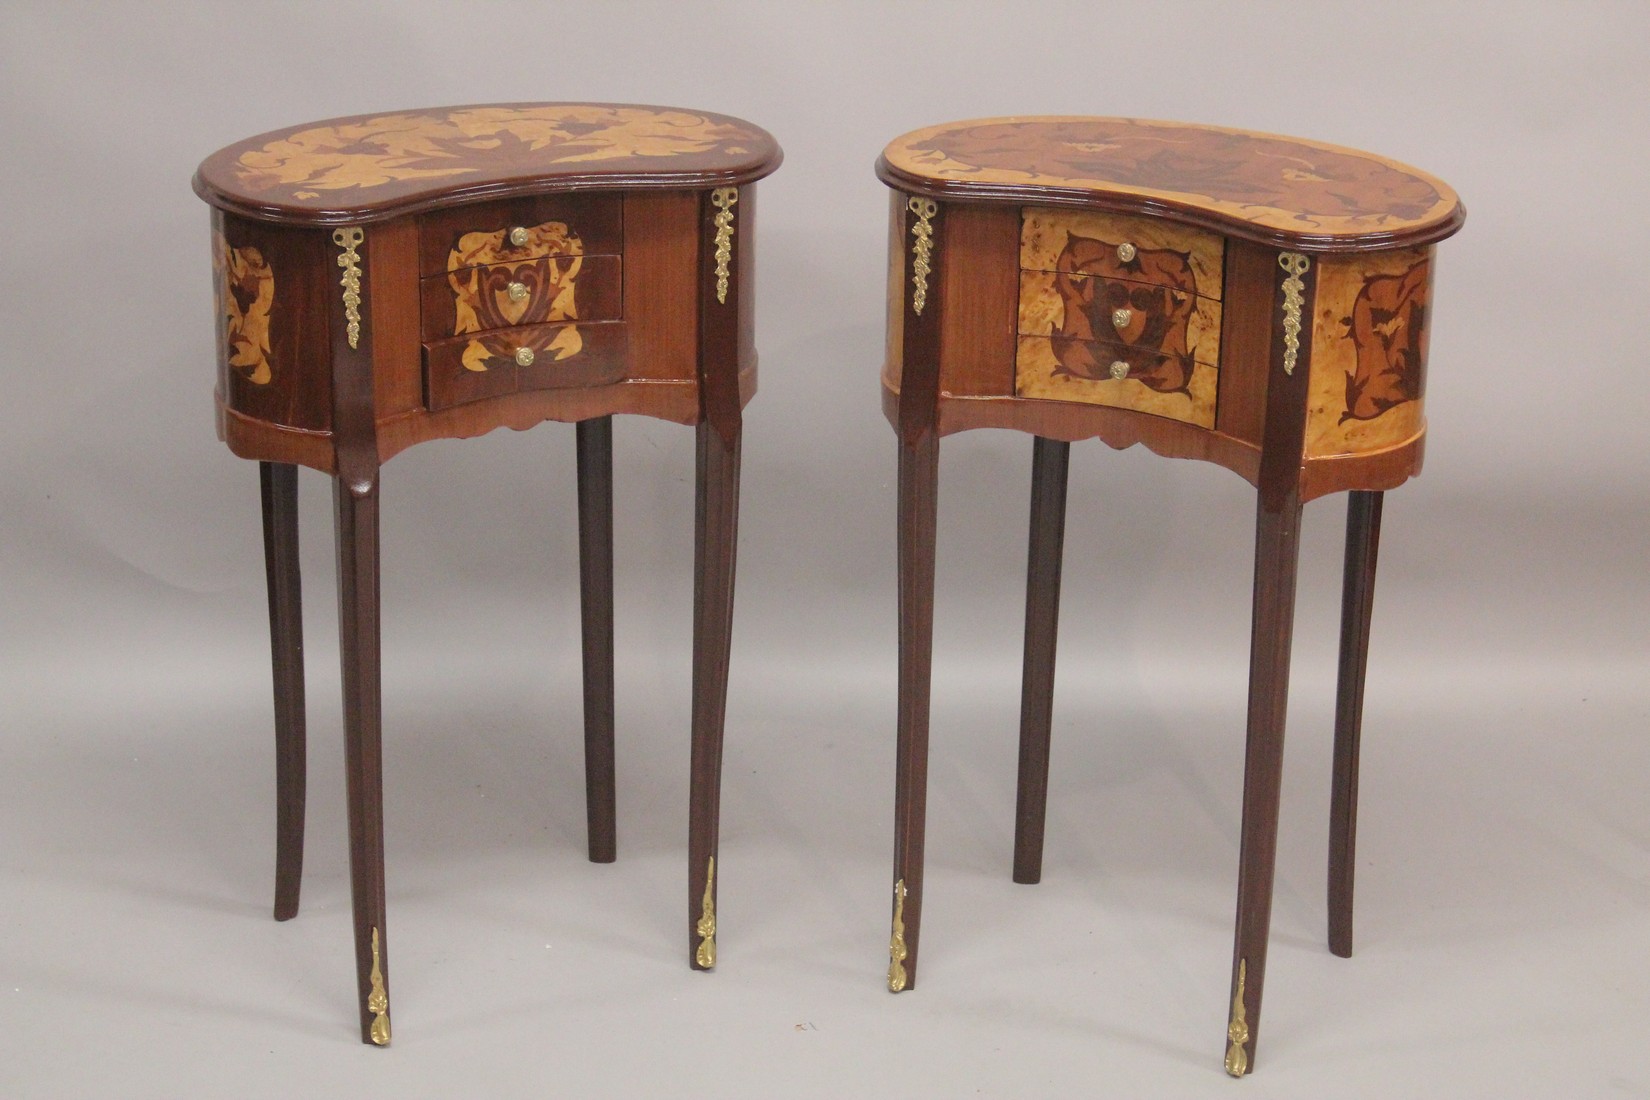 A GOOD PAIR OF LOUIS XVITH STYLE, INLAID KIDNEY SHAPED BEDSIDE CABINET with three drawers. 1ft